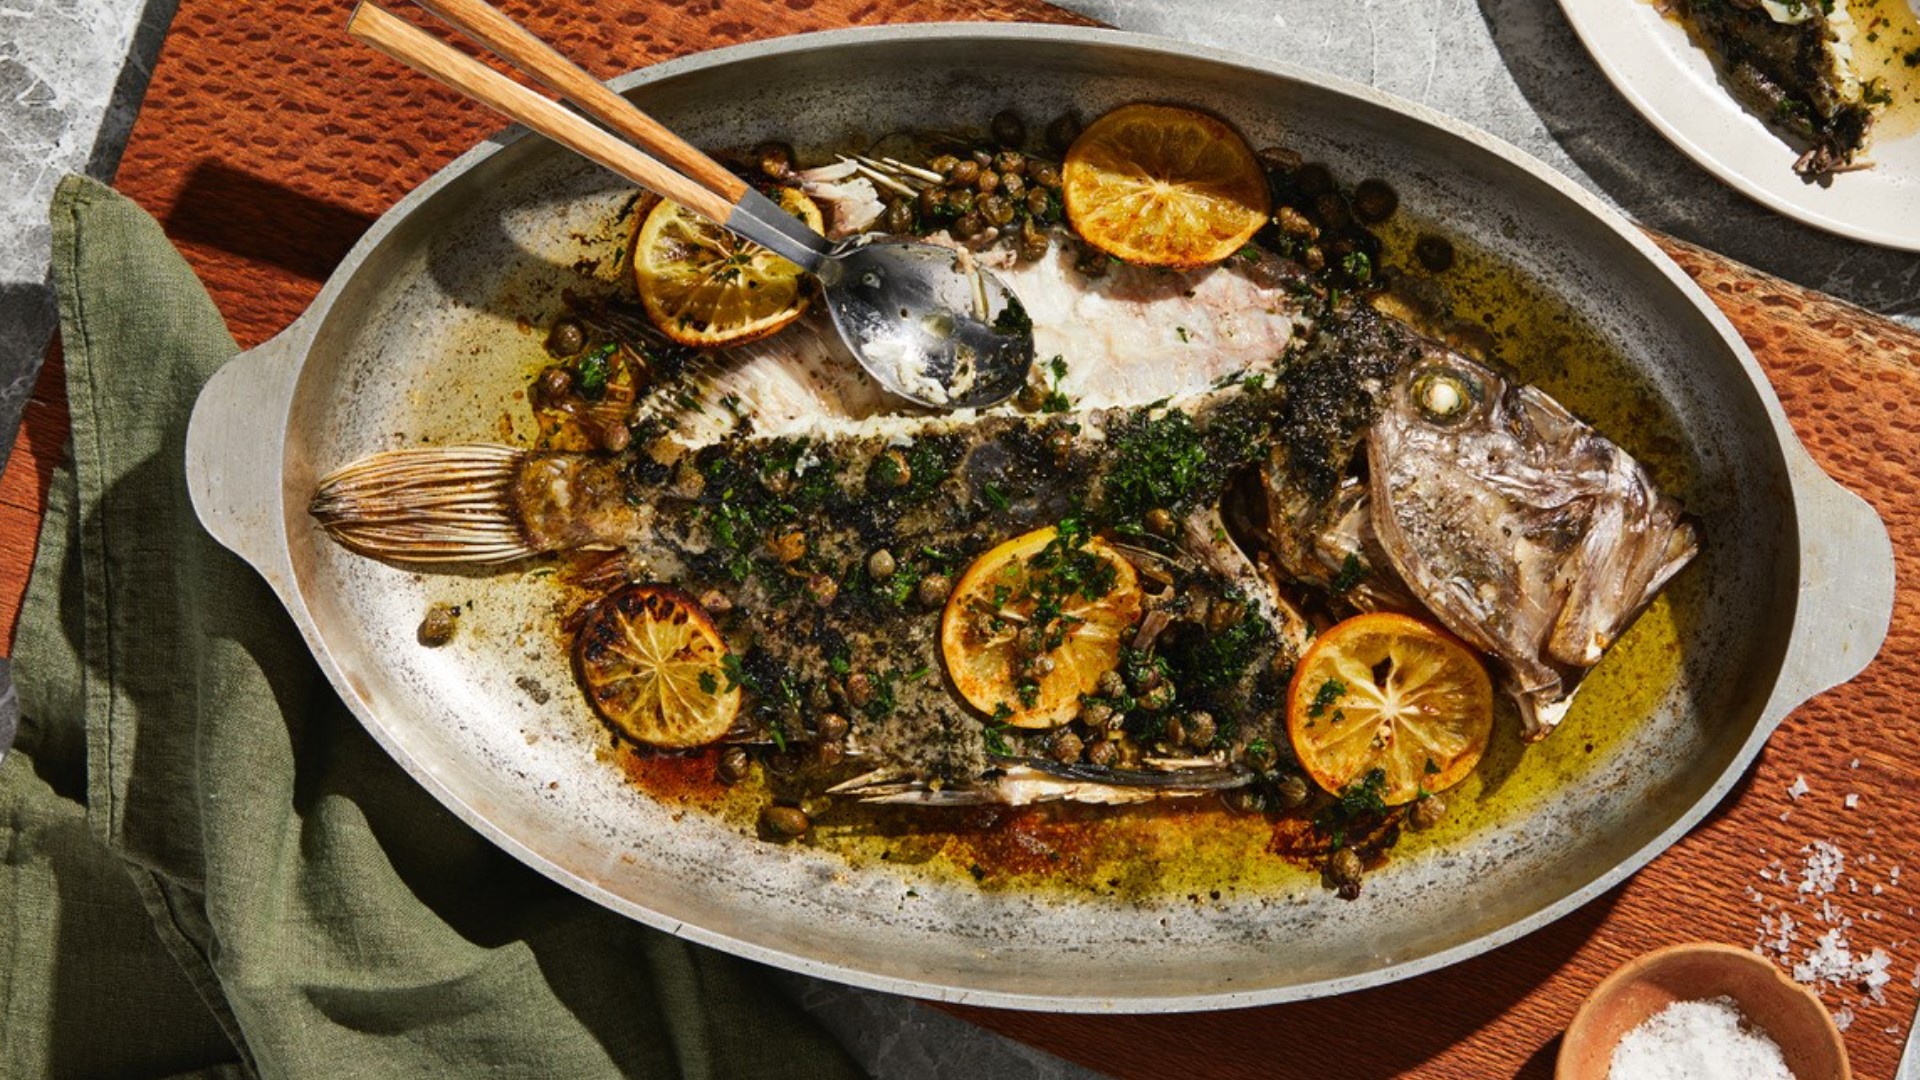 Danielle Alvarez literally wrote the book!  Try out this recipe for Whole Roasted John Dory from her book, "Always Add Lemon" to put her theory to the test.